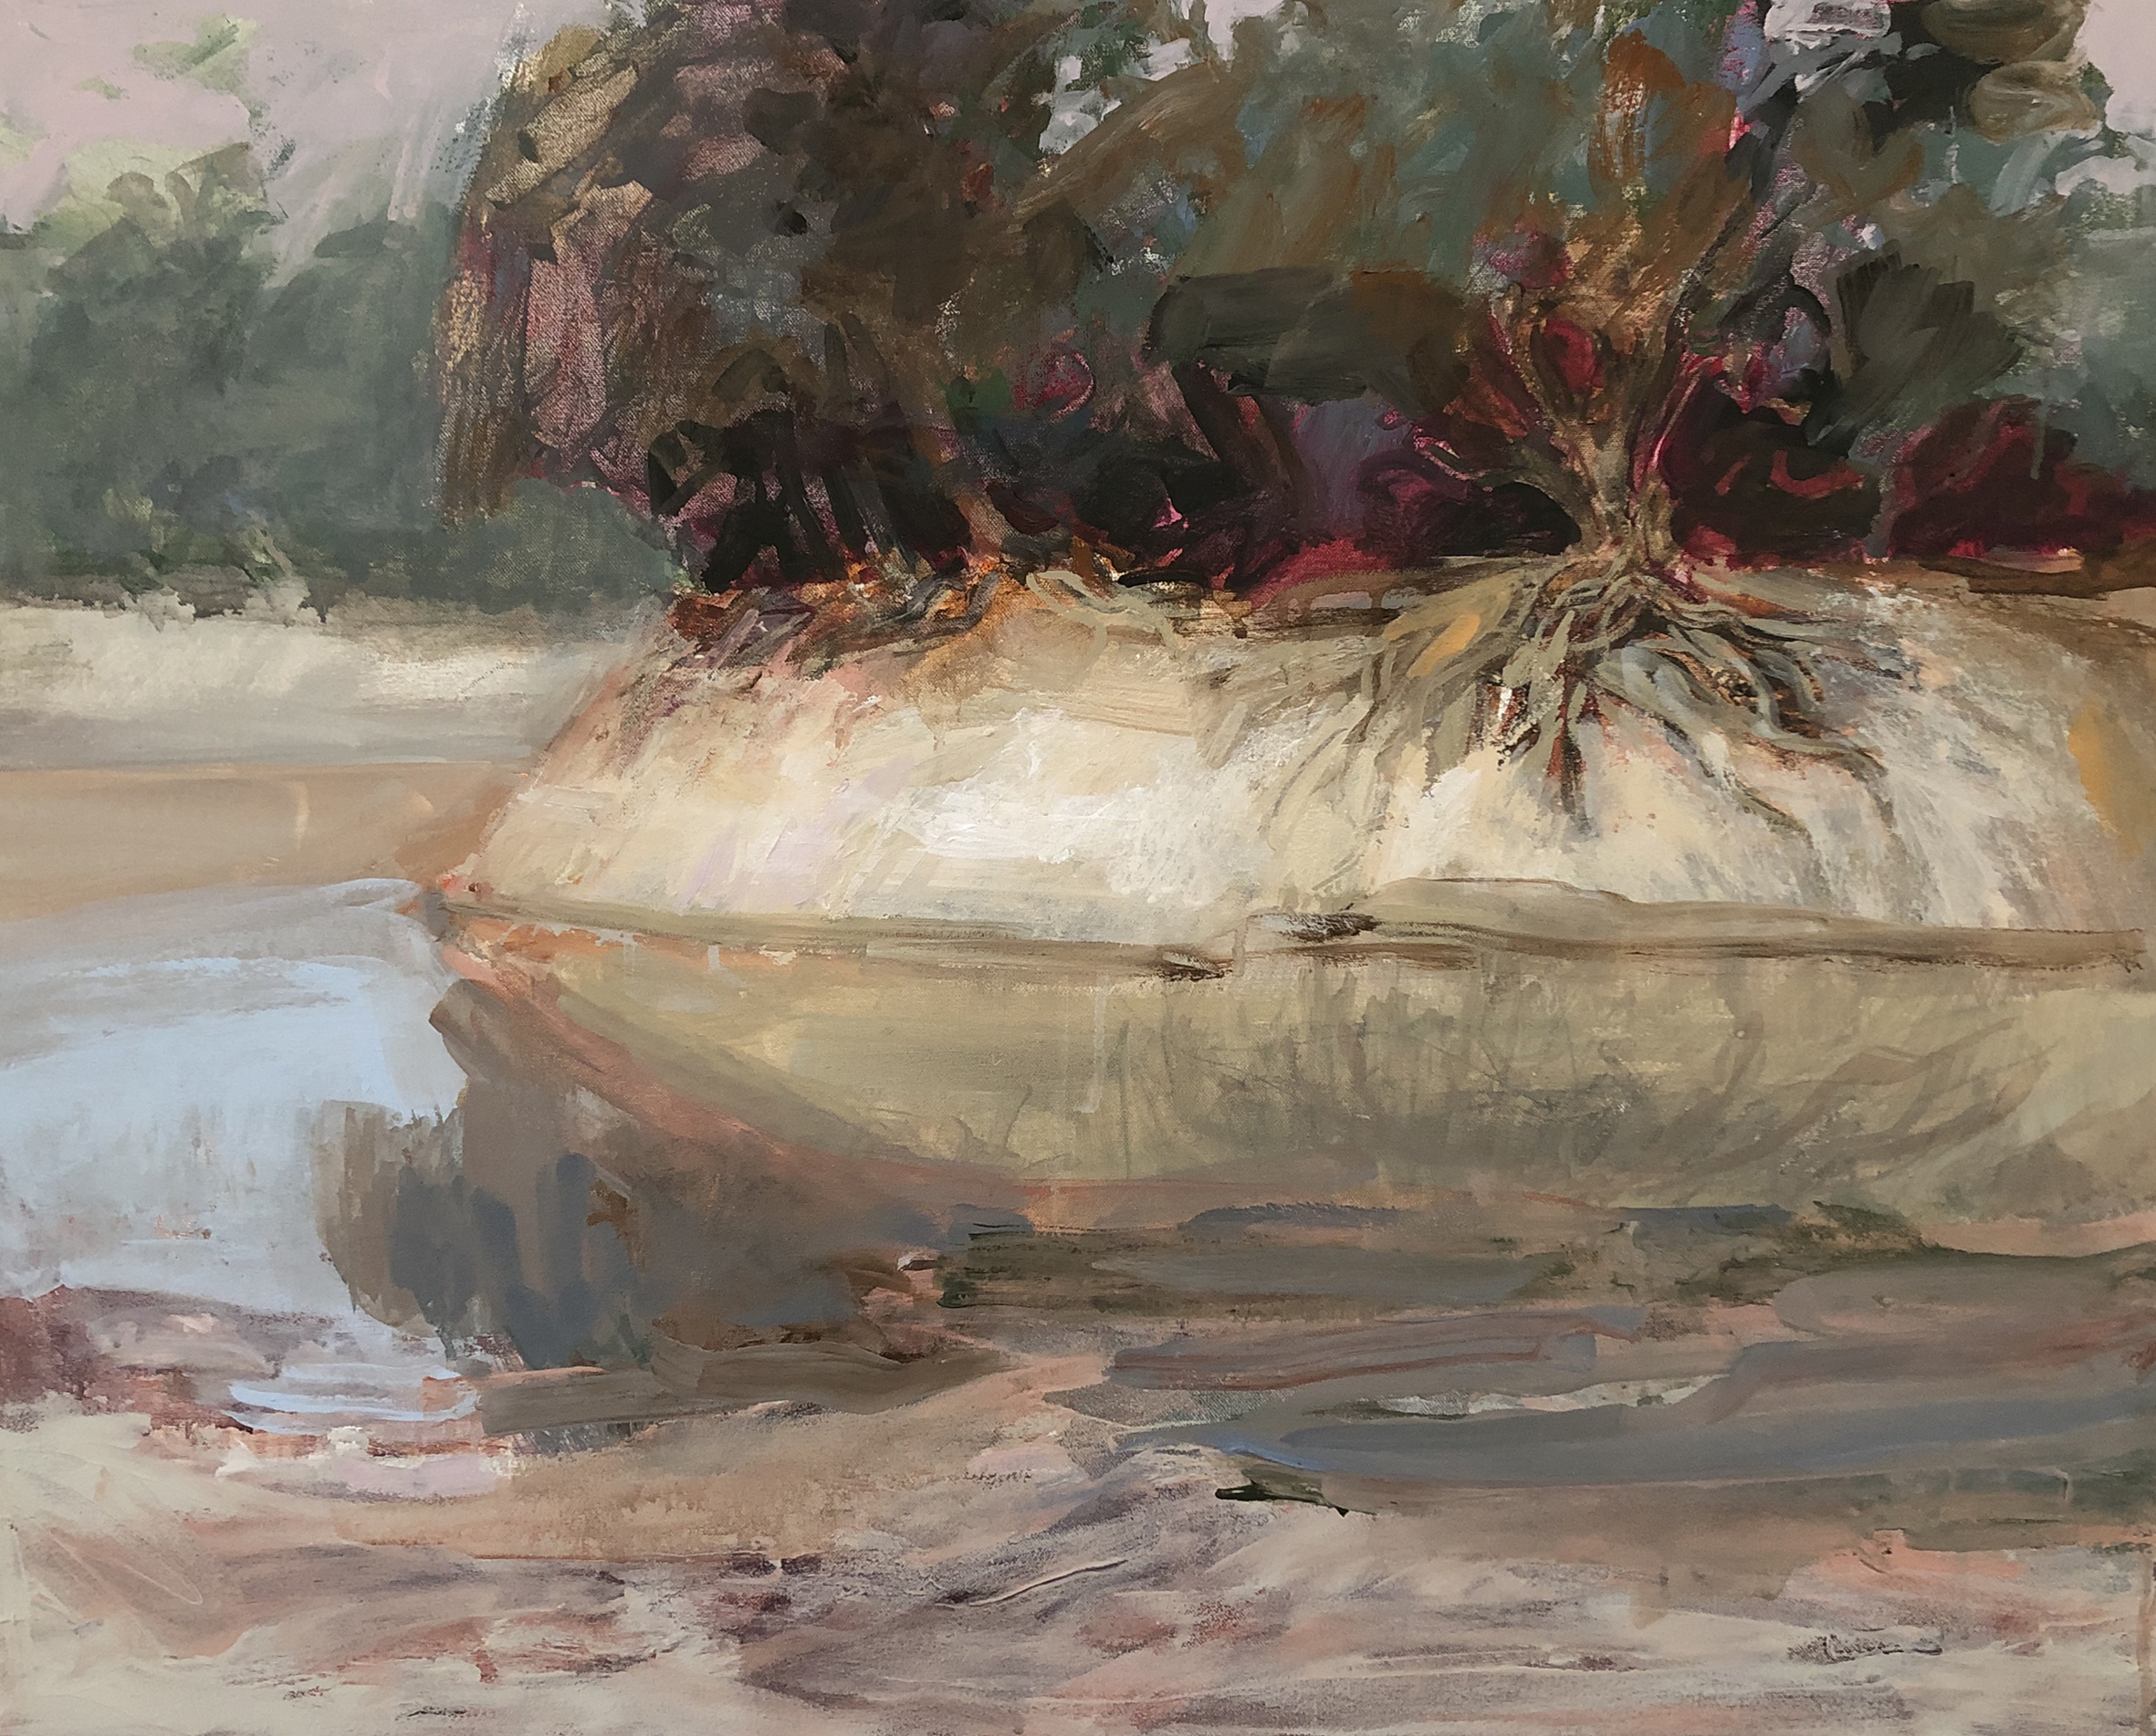 McInnis_Darling River_Oil on Canvas_60 x 75cm_master